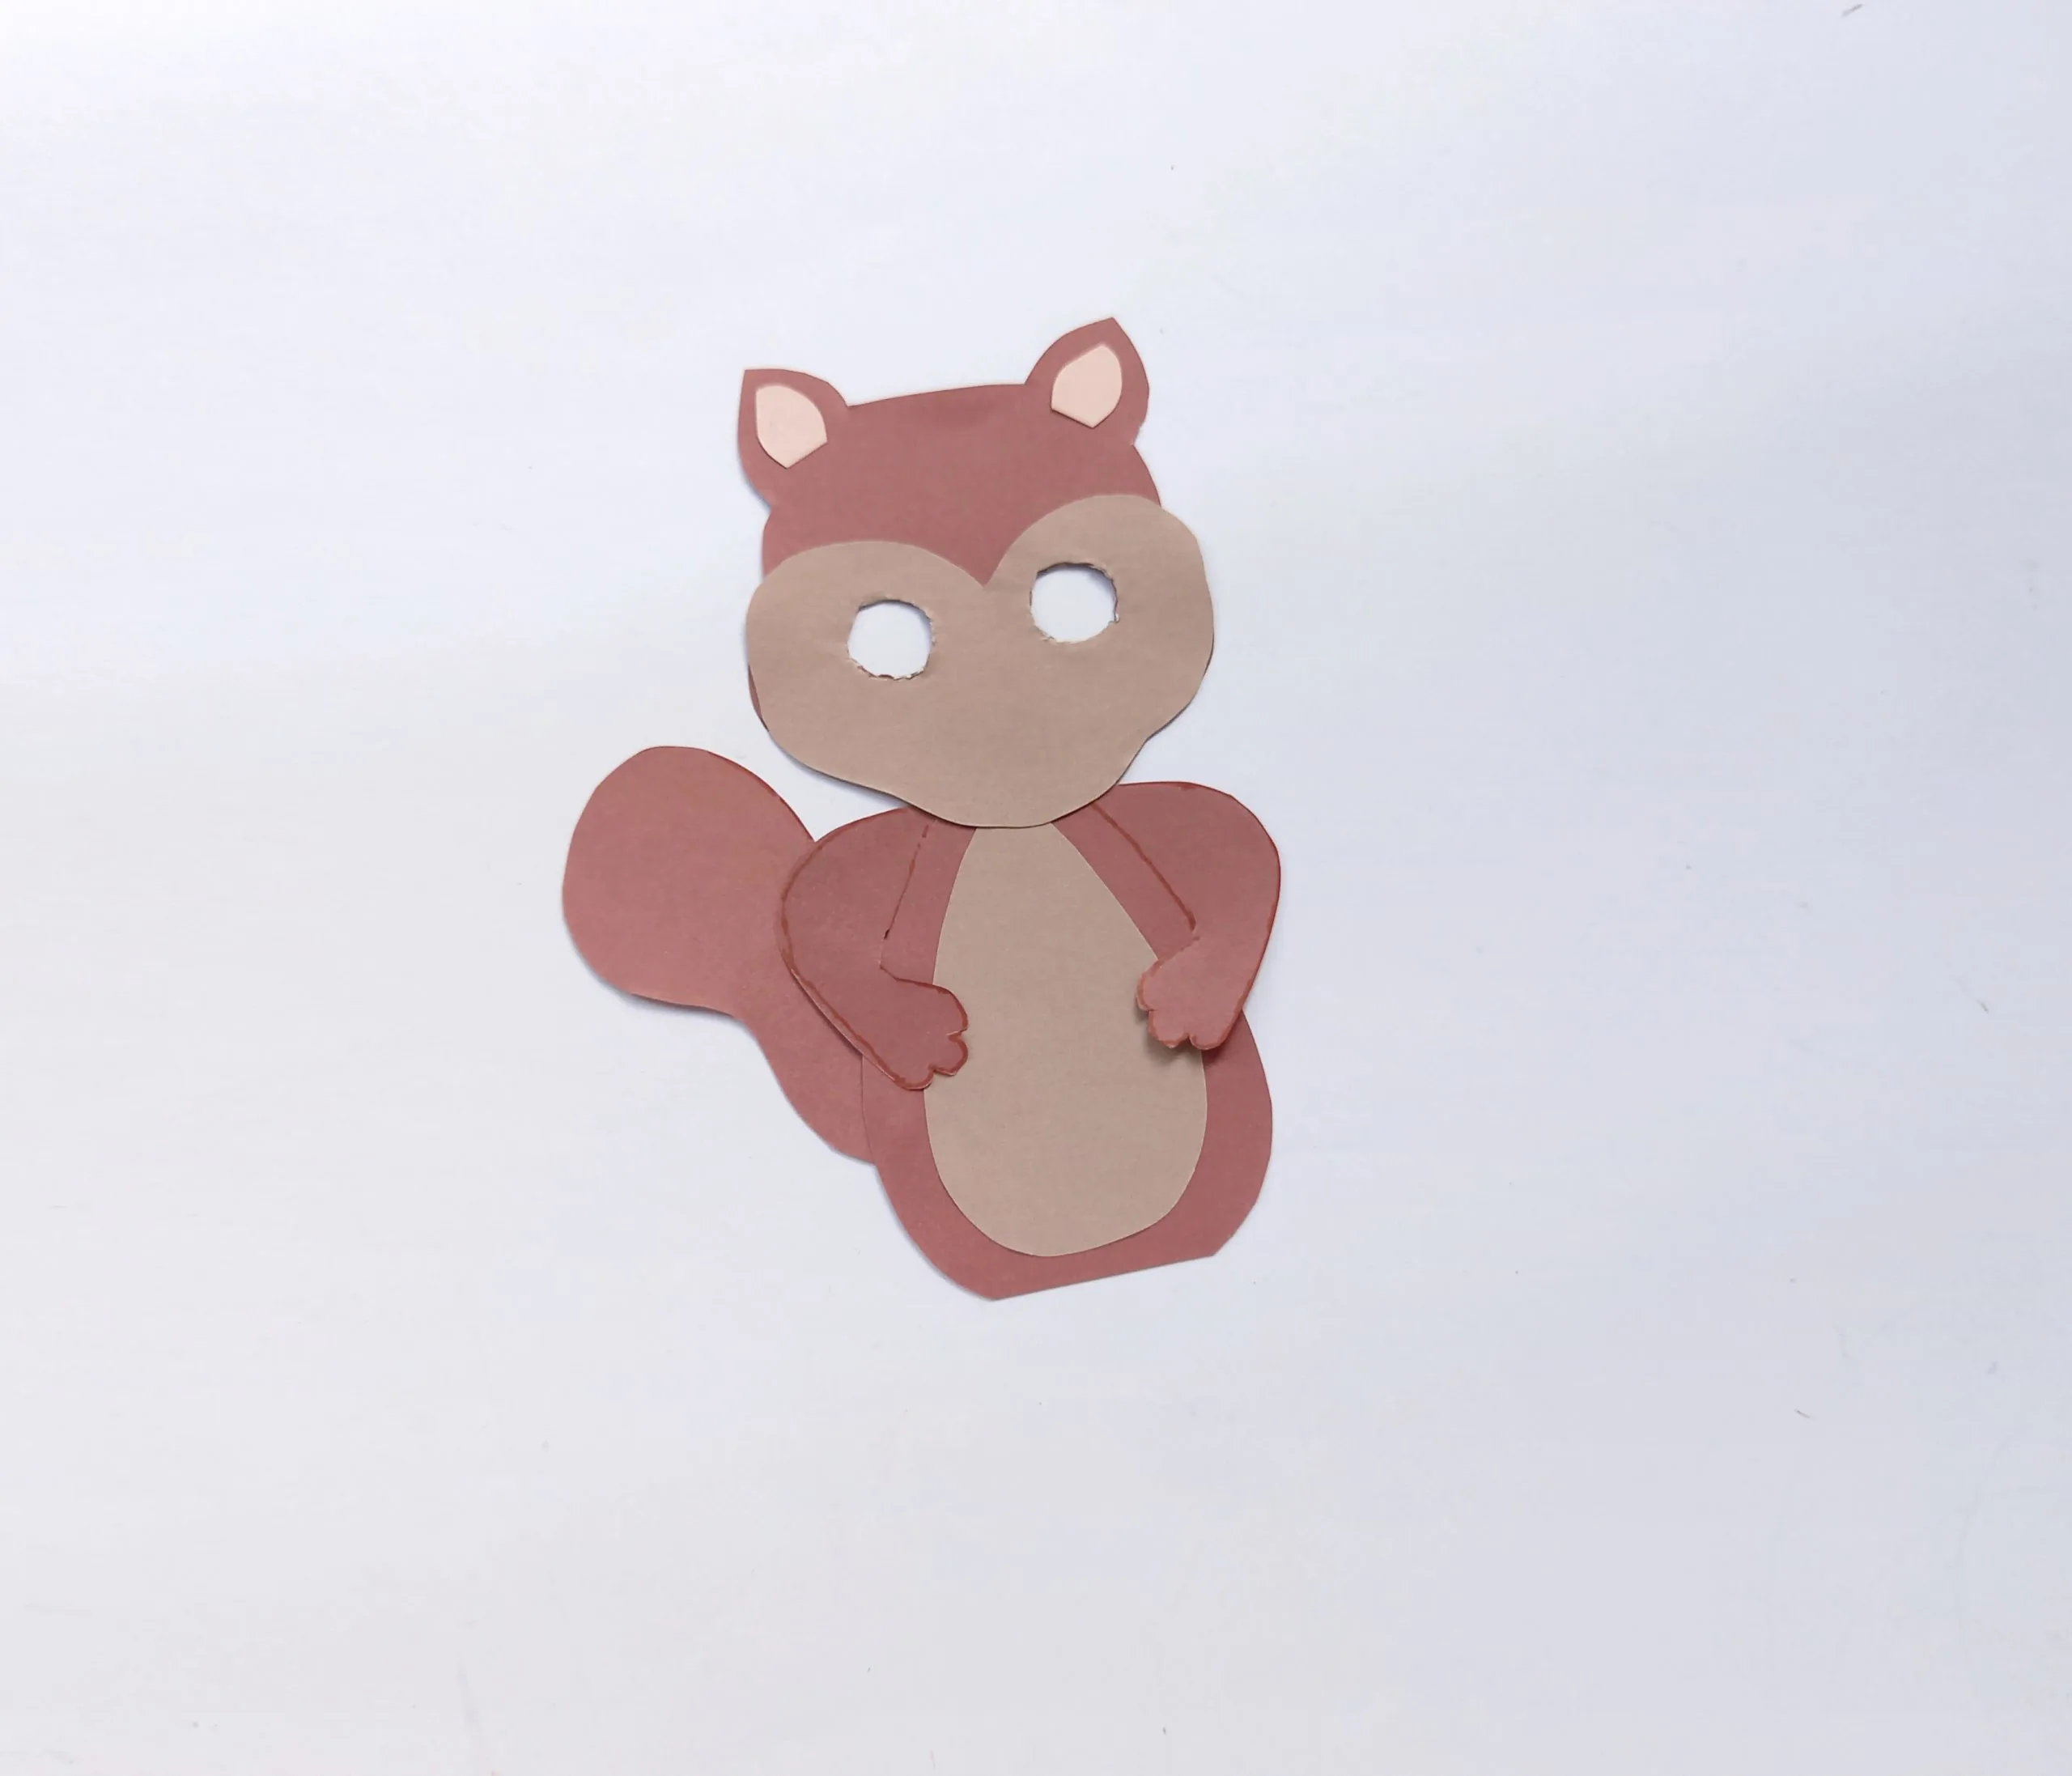 how to make a paper squirrel with moving eyes